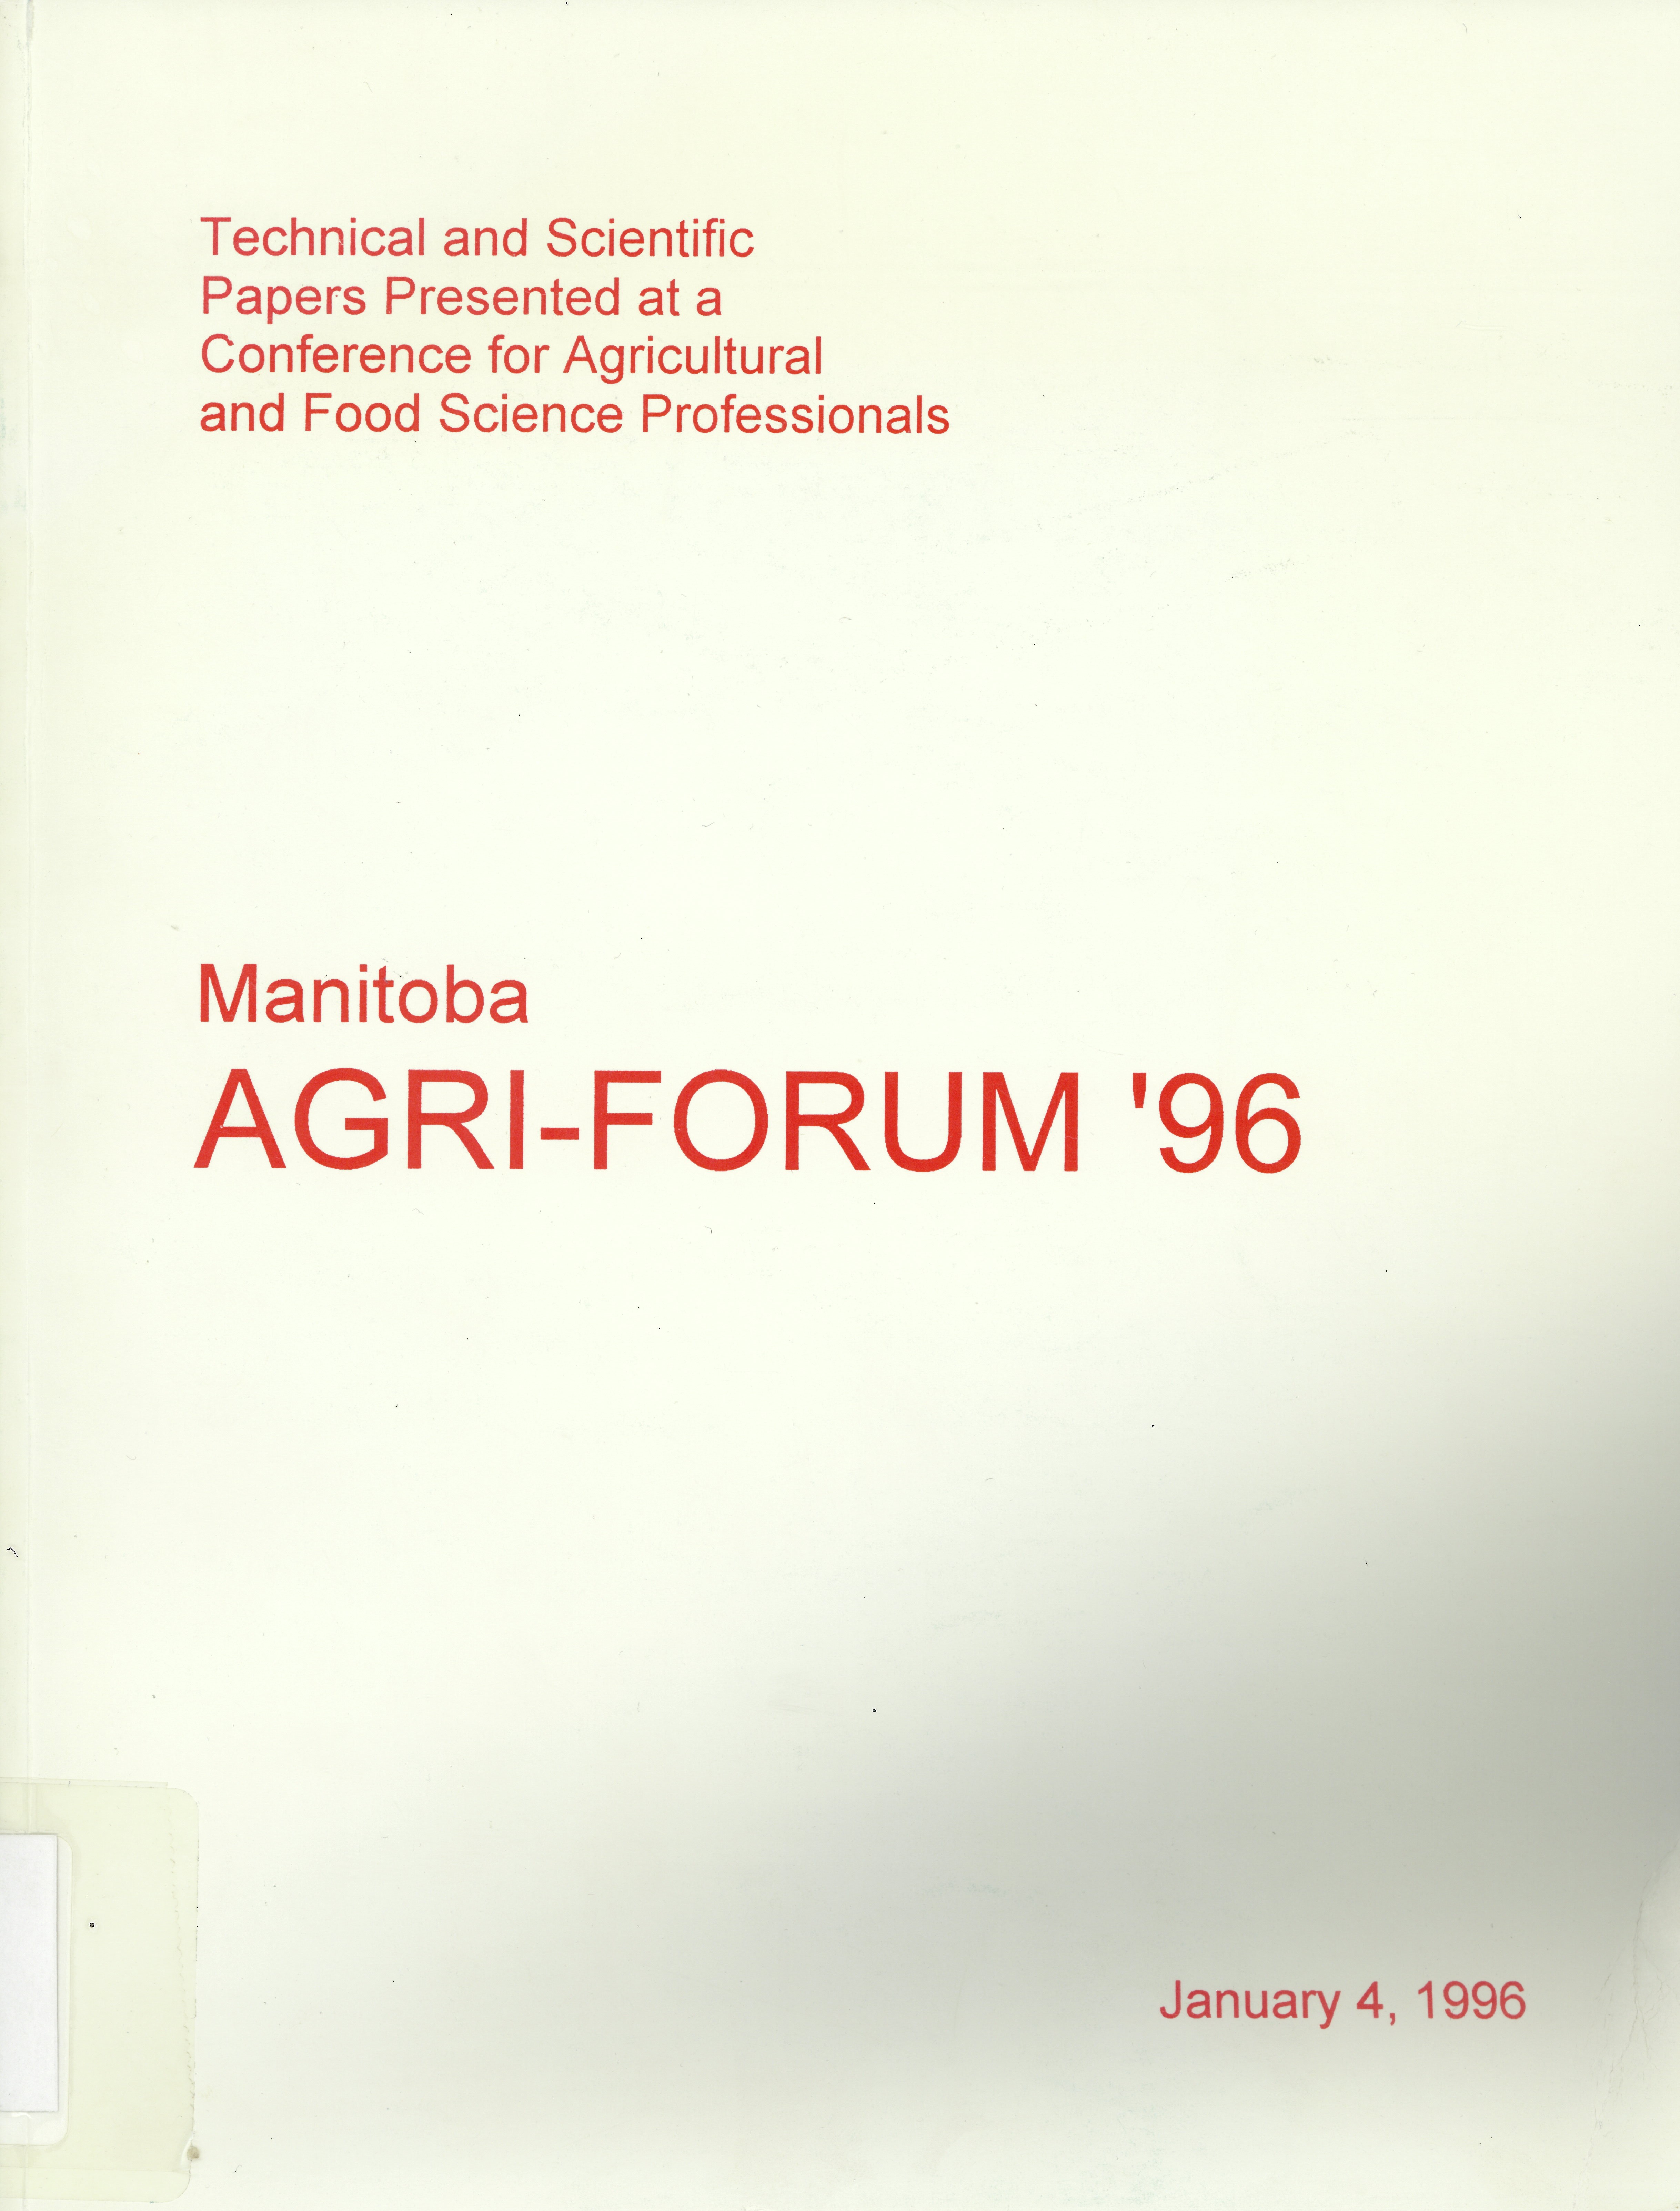 Technical and scientific papers presented at Manitoba Agri-Forum '96.